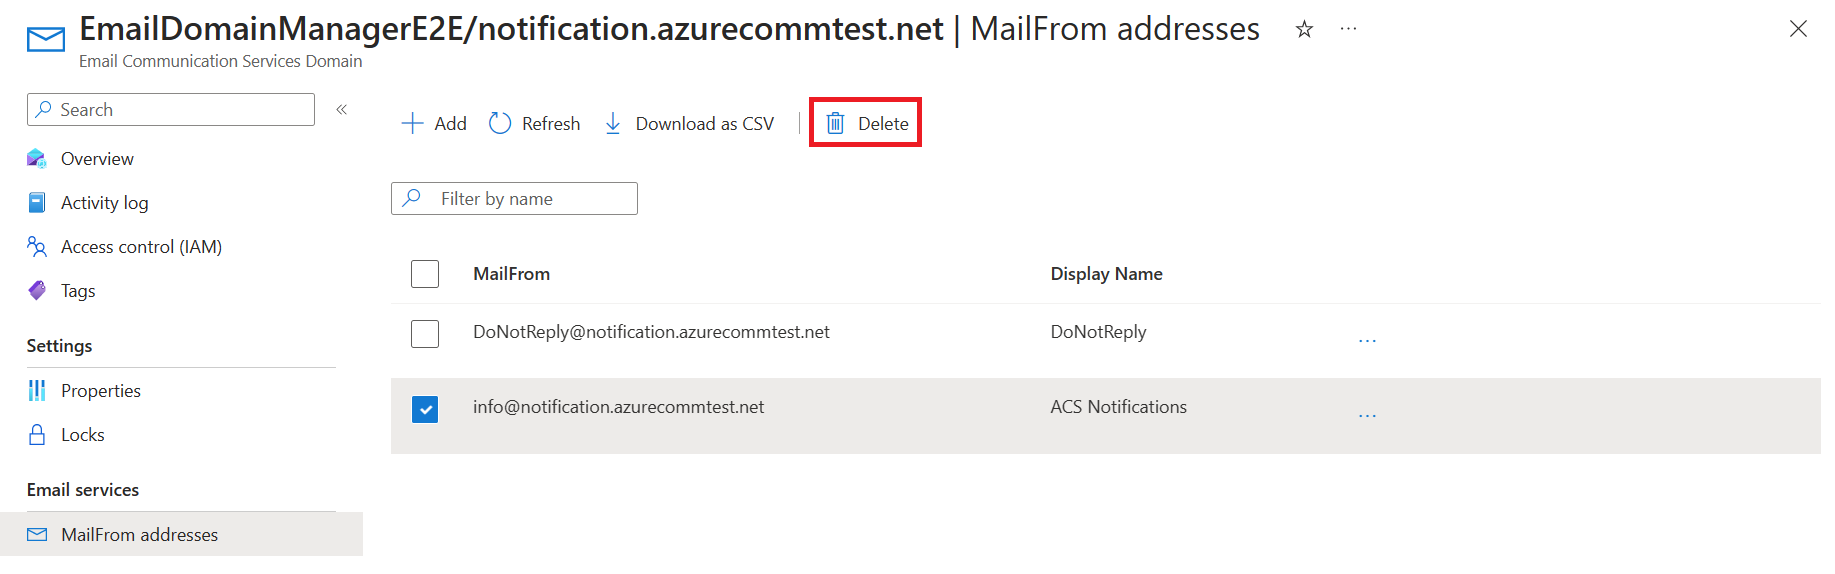 Screenshot that shows MailFrom addresses list with deletion.